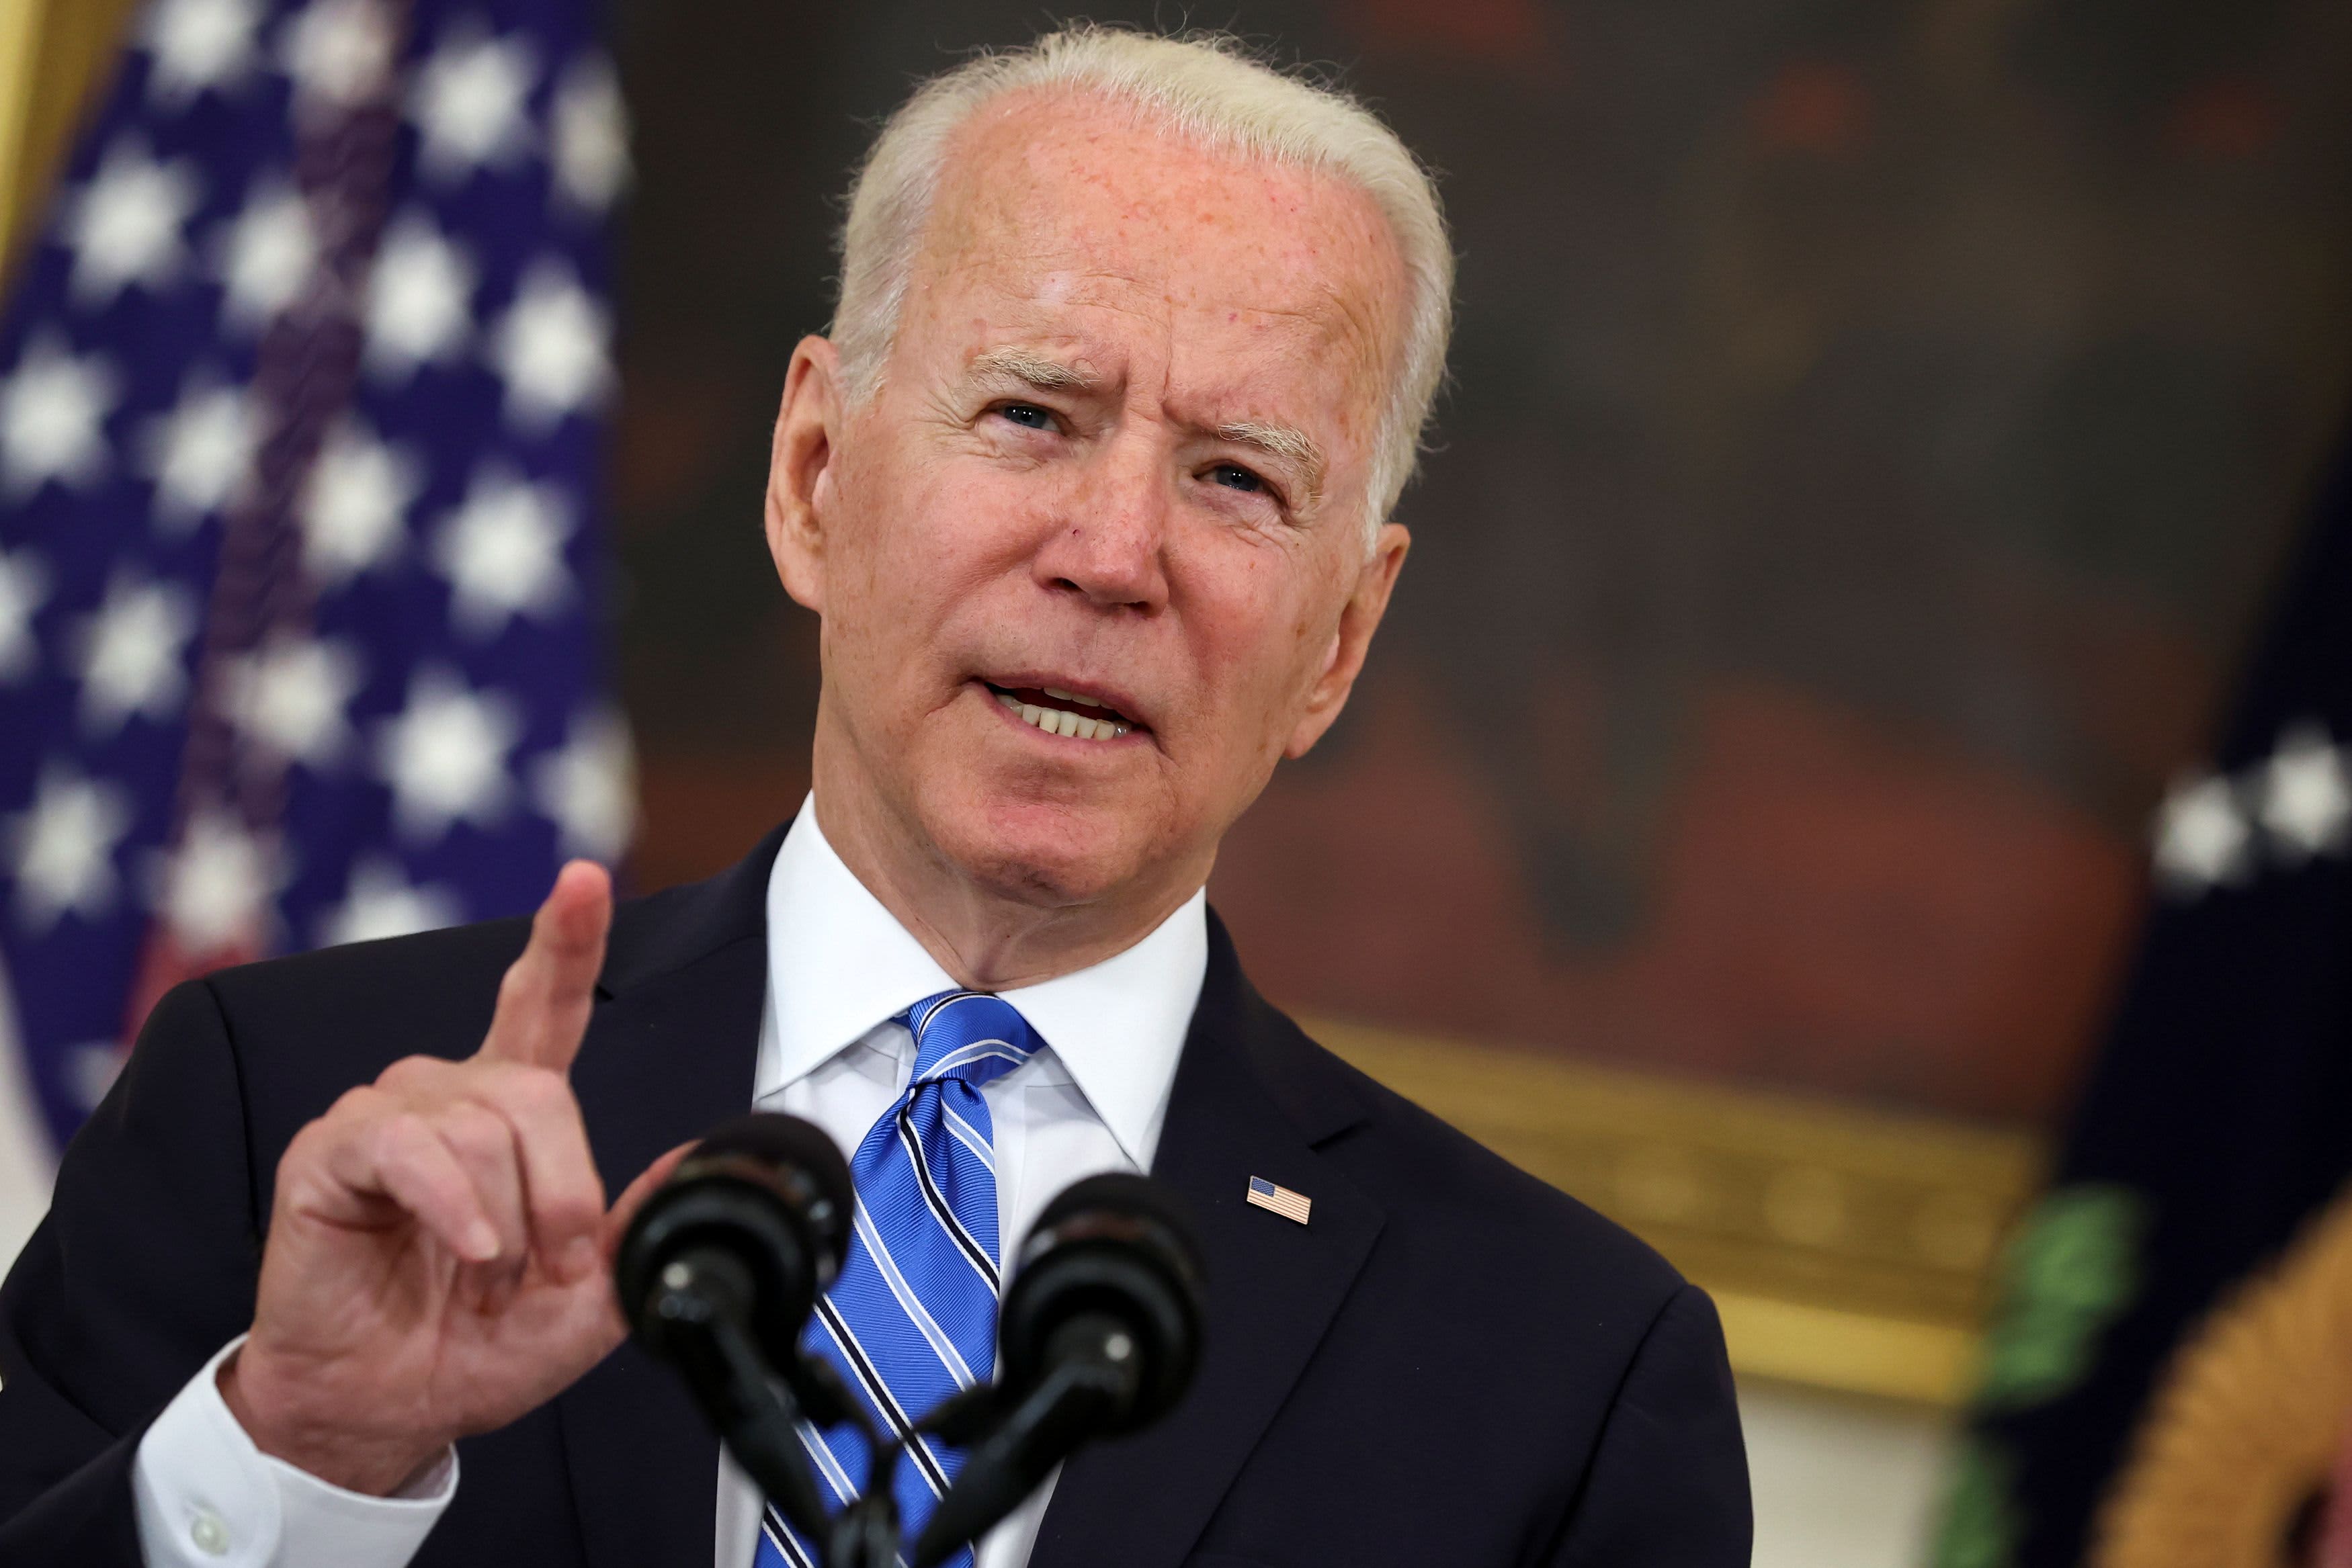 Biden walks back Facebook ‘killing people’ comment, says he was talking about users spreading misinformation